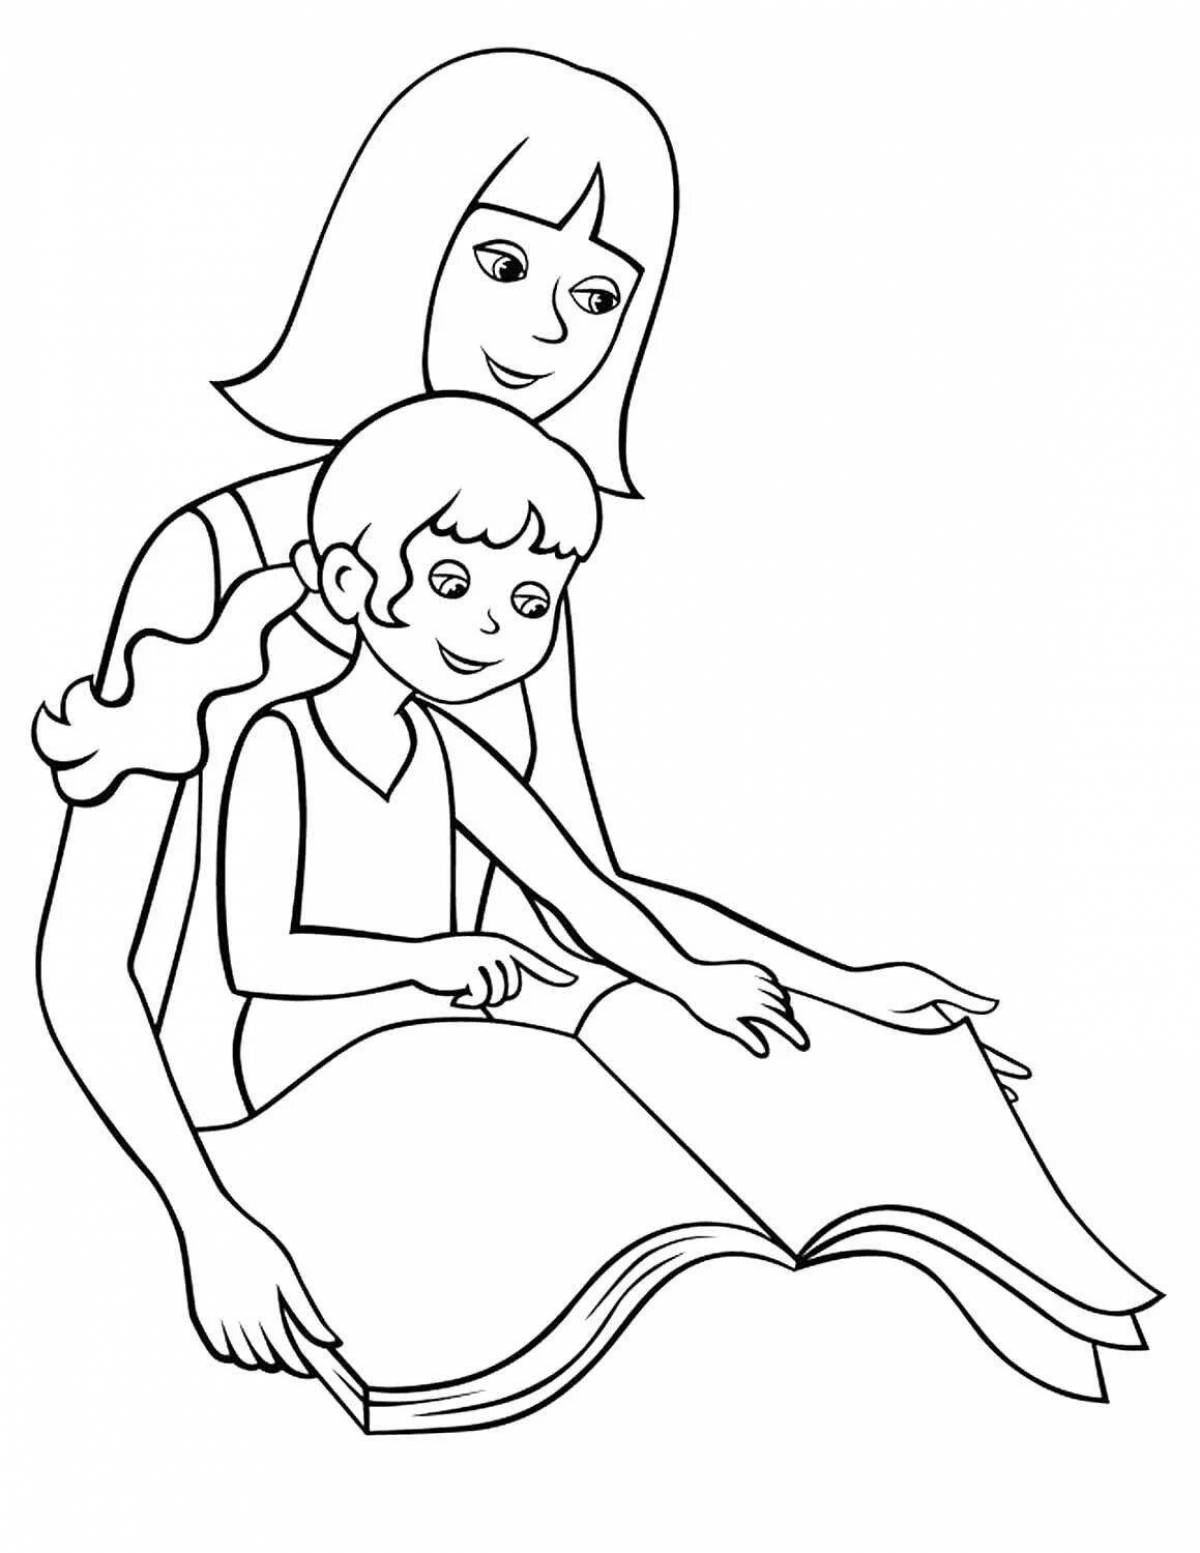 Colouring serene mom and baby